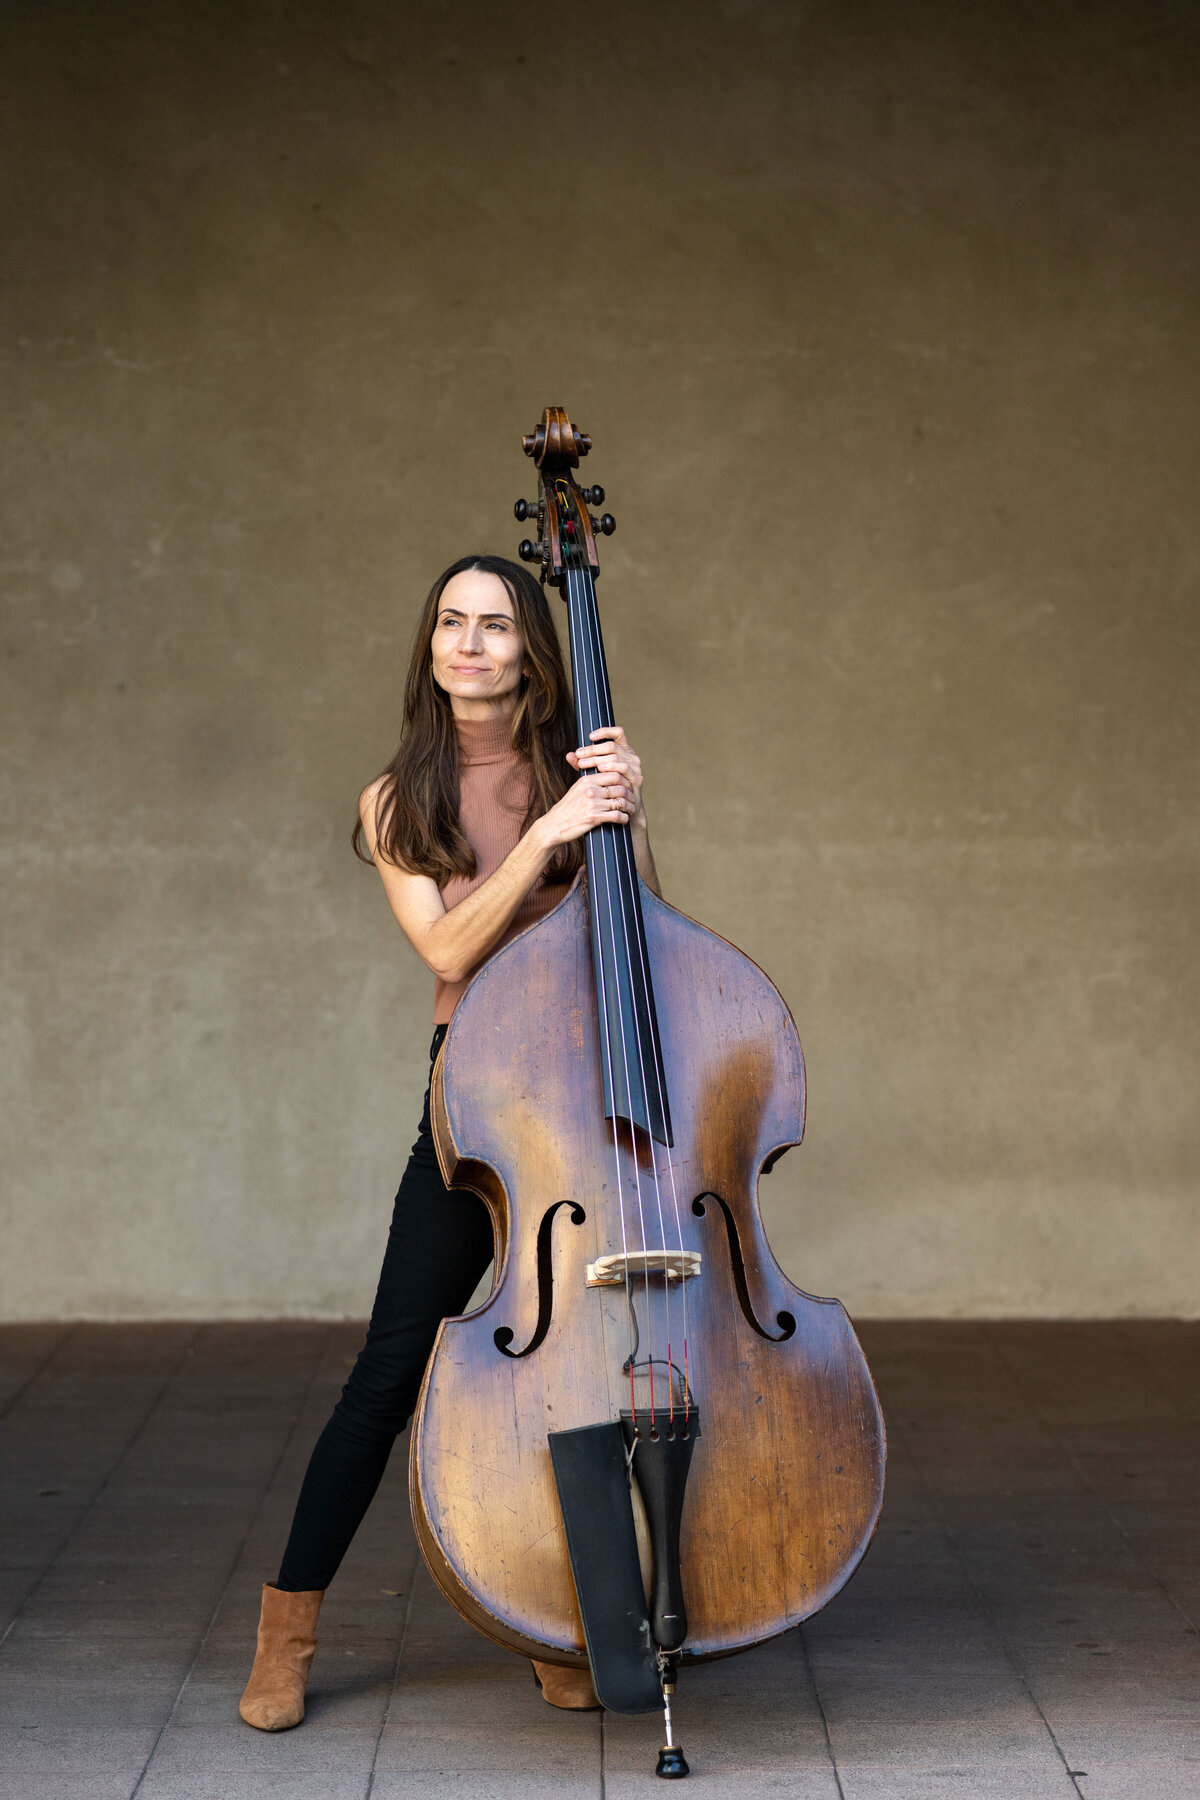 Professional Bass play poses with an upright acoustic bass in Balboa Part for an artistic portrait